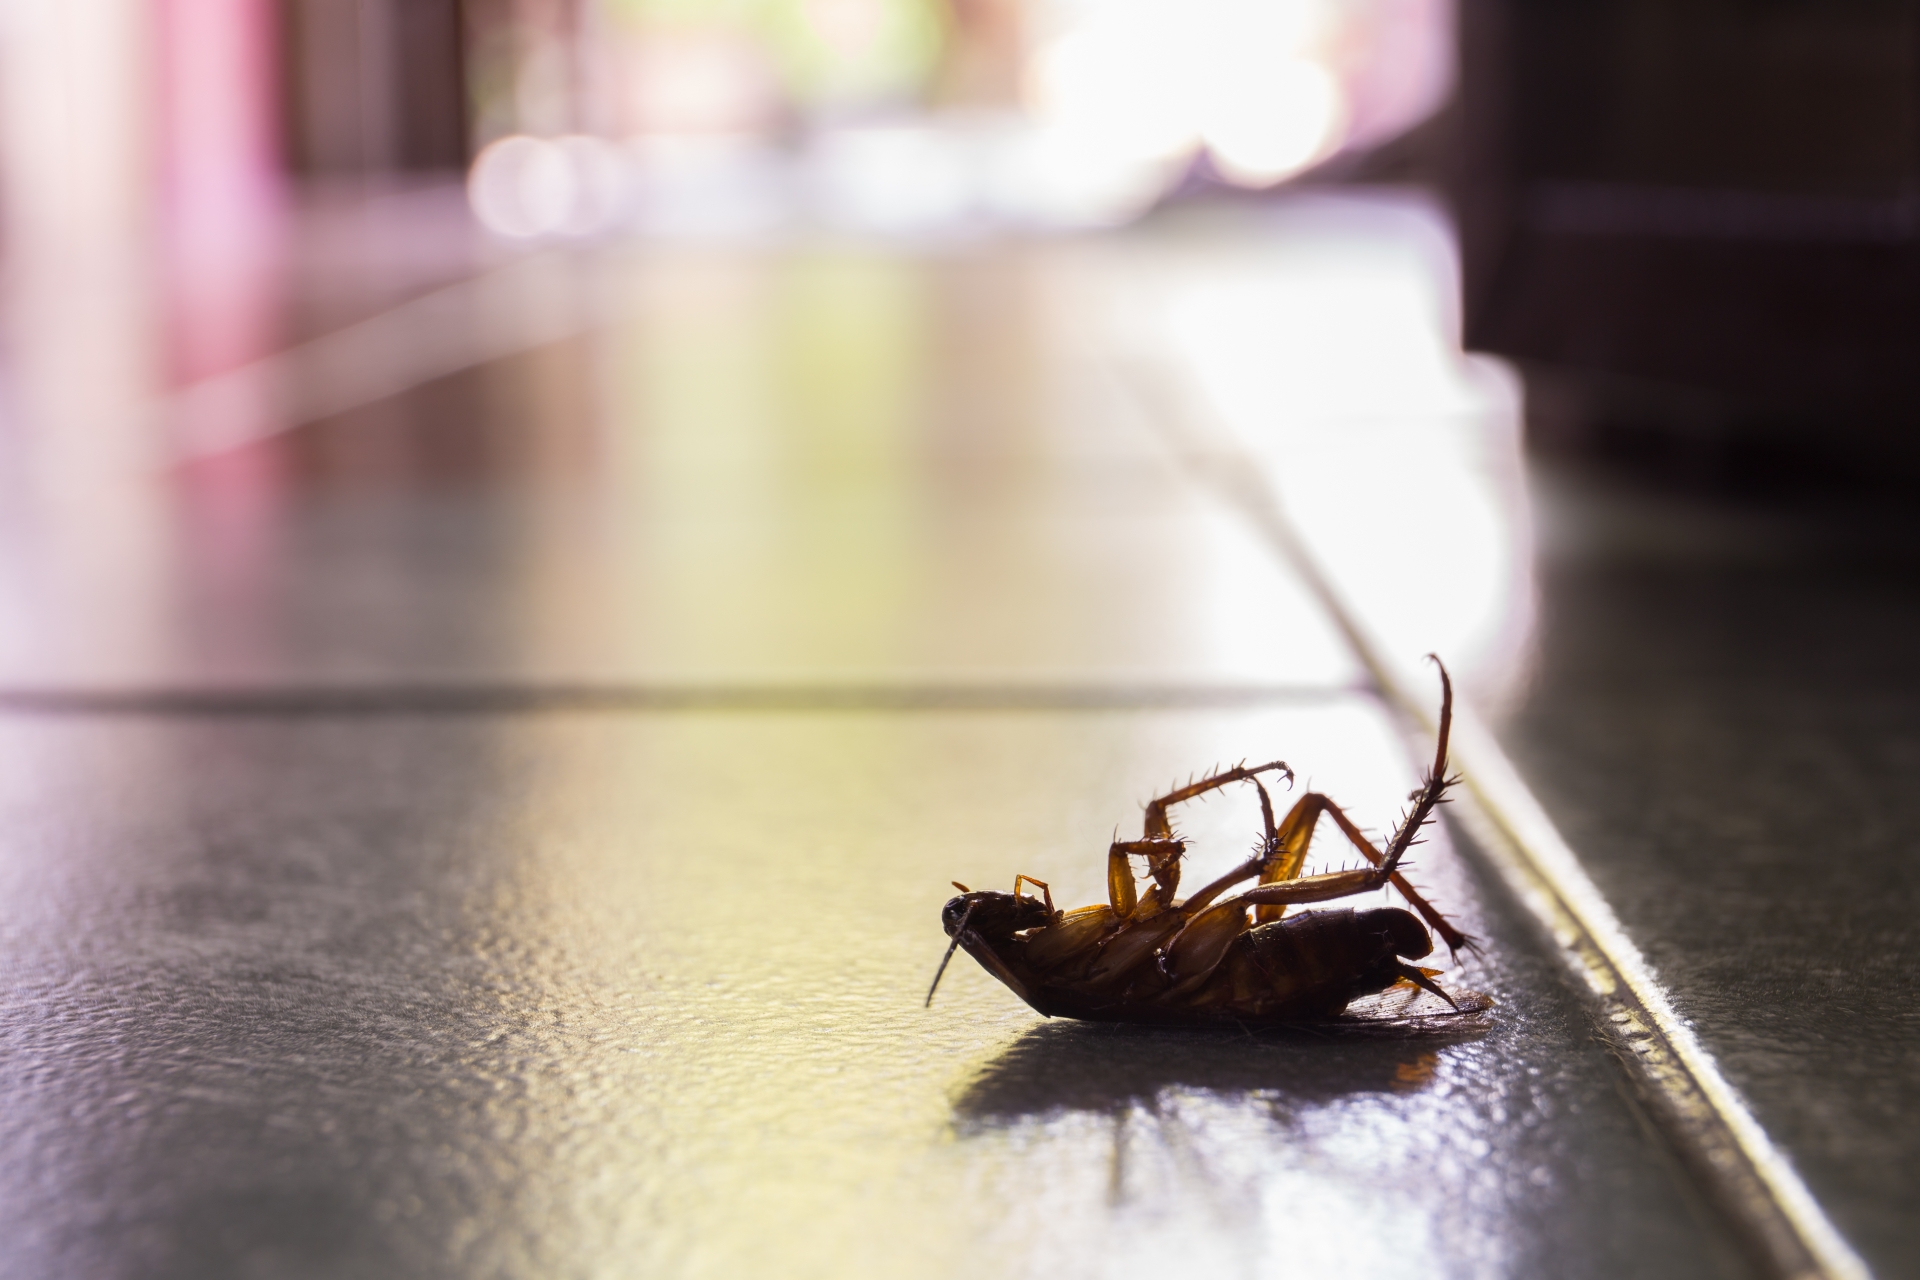 Cockroach Control, Pest Control in Watford, Cassiobury, WD17. Call Now 020 8166 9746